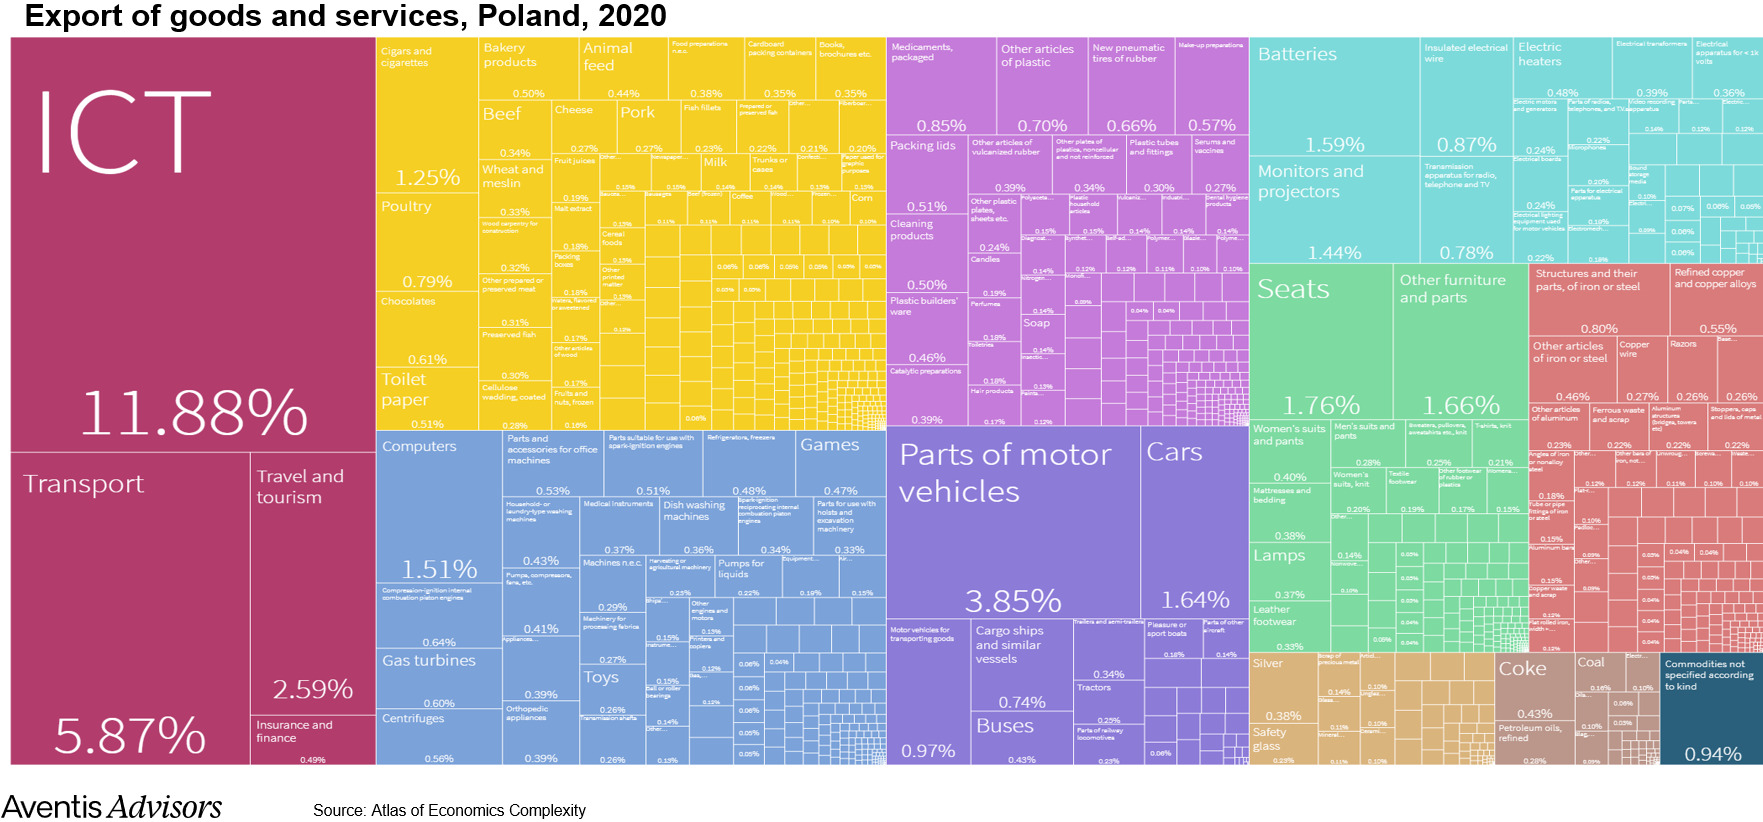 Poland export of goods and services